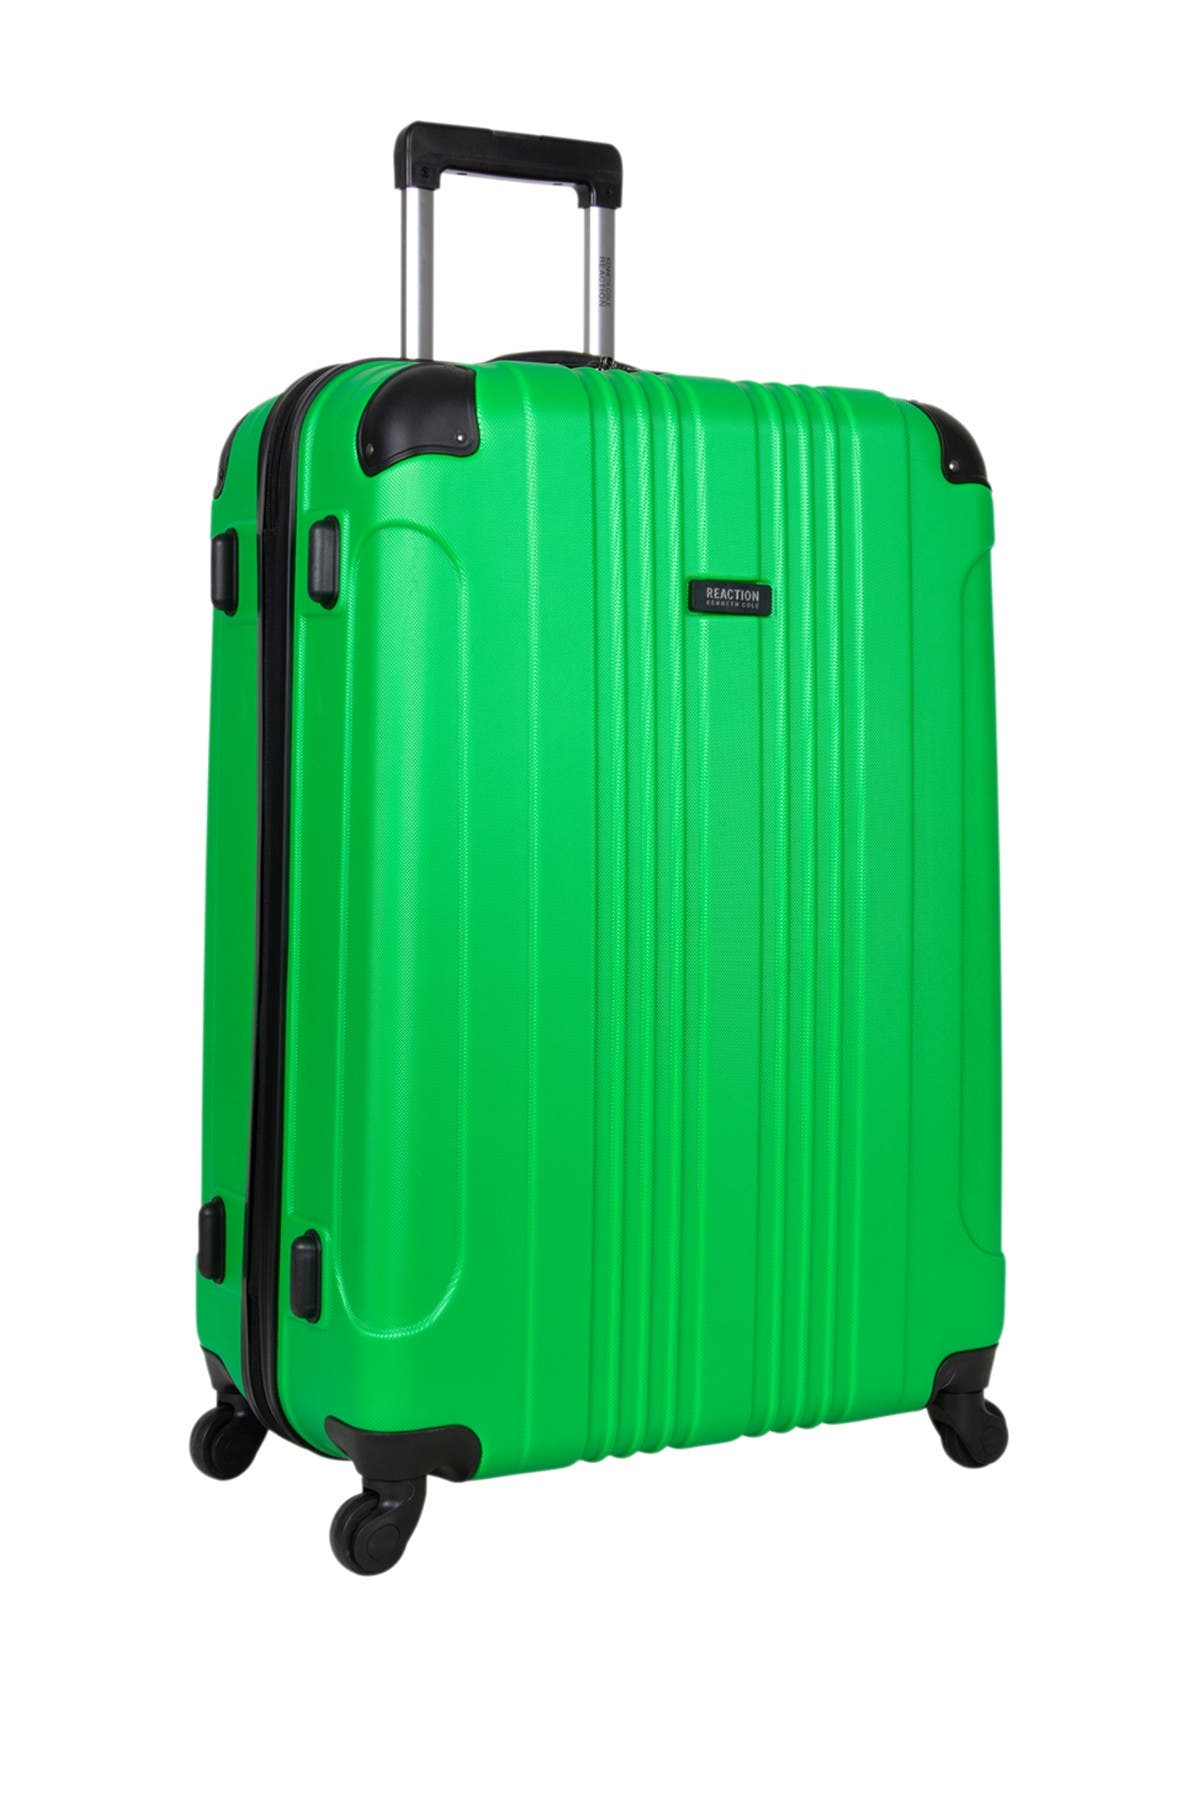 Kenneth Cole Reaction 28" Lightweight Hardside 4-wheel Spinner Luggage In Bright Green